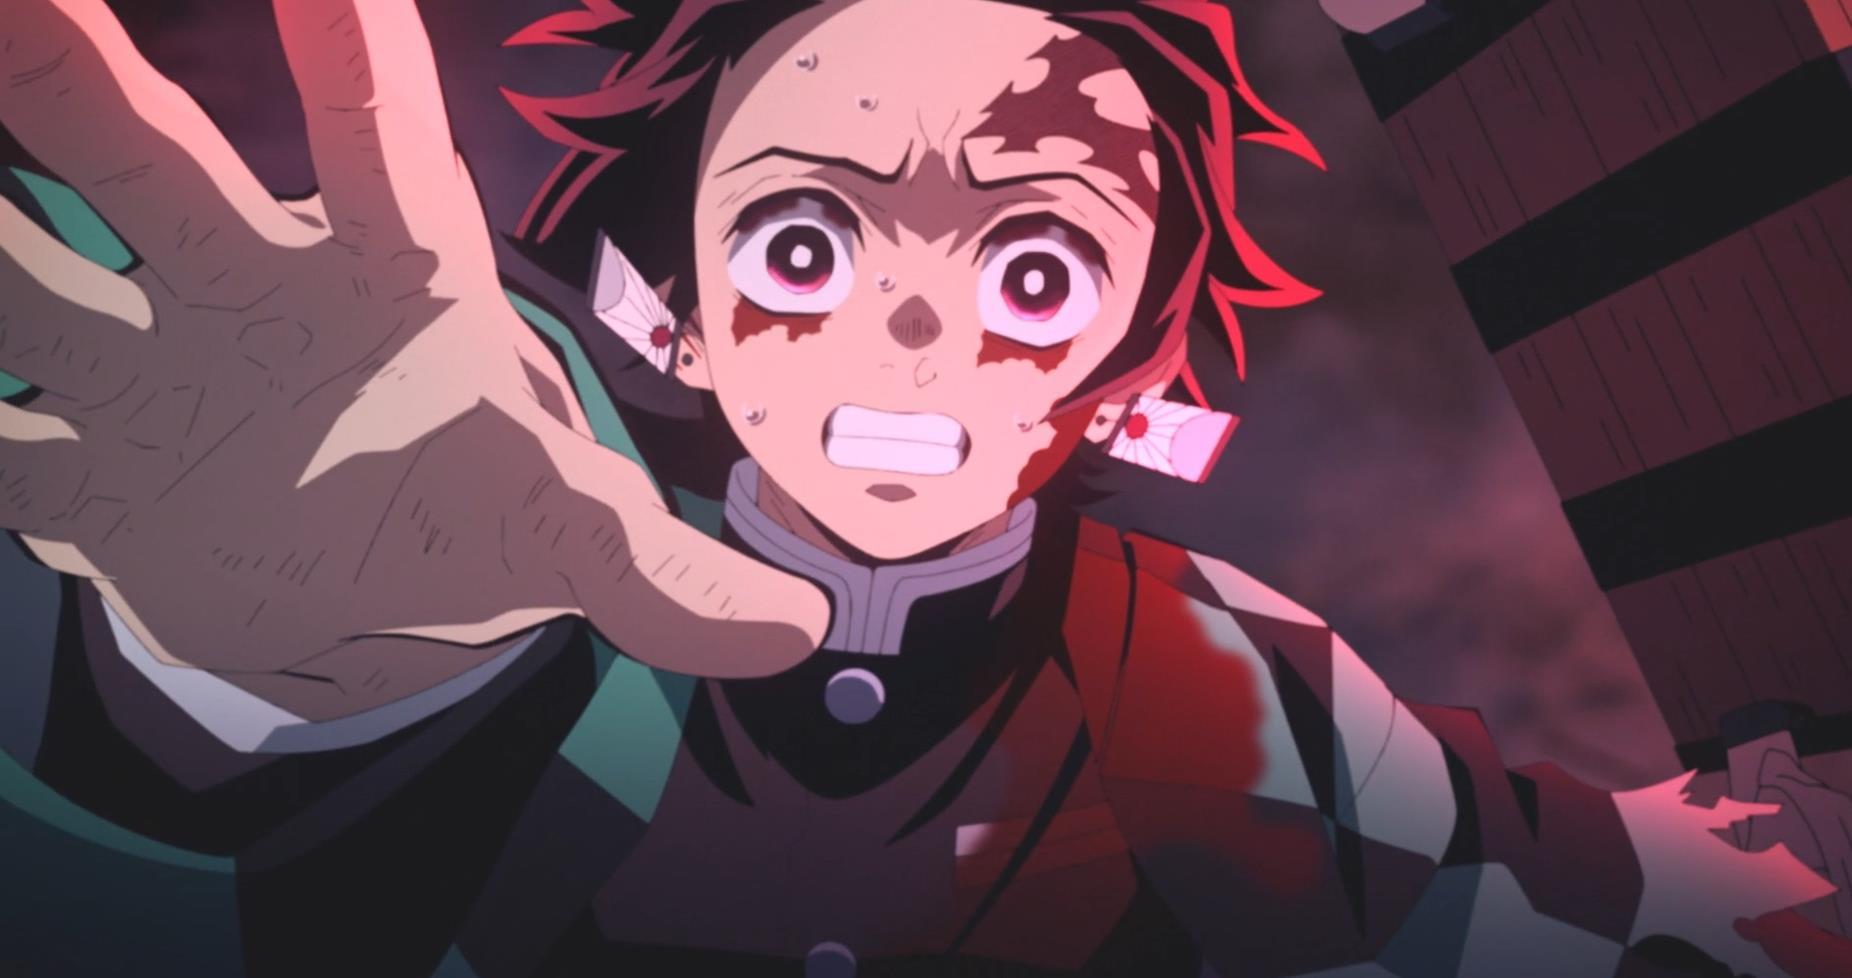 Demon Slayer Season 3 Episode 9 Summary Memories from the Past The X1lybl1Z 1 1